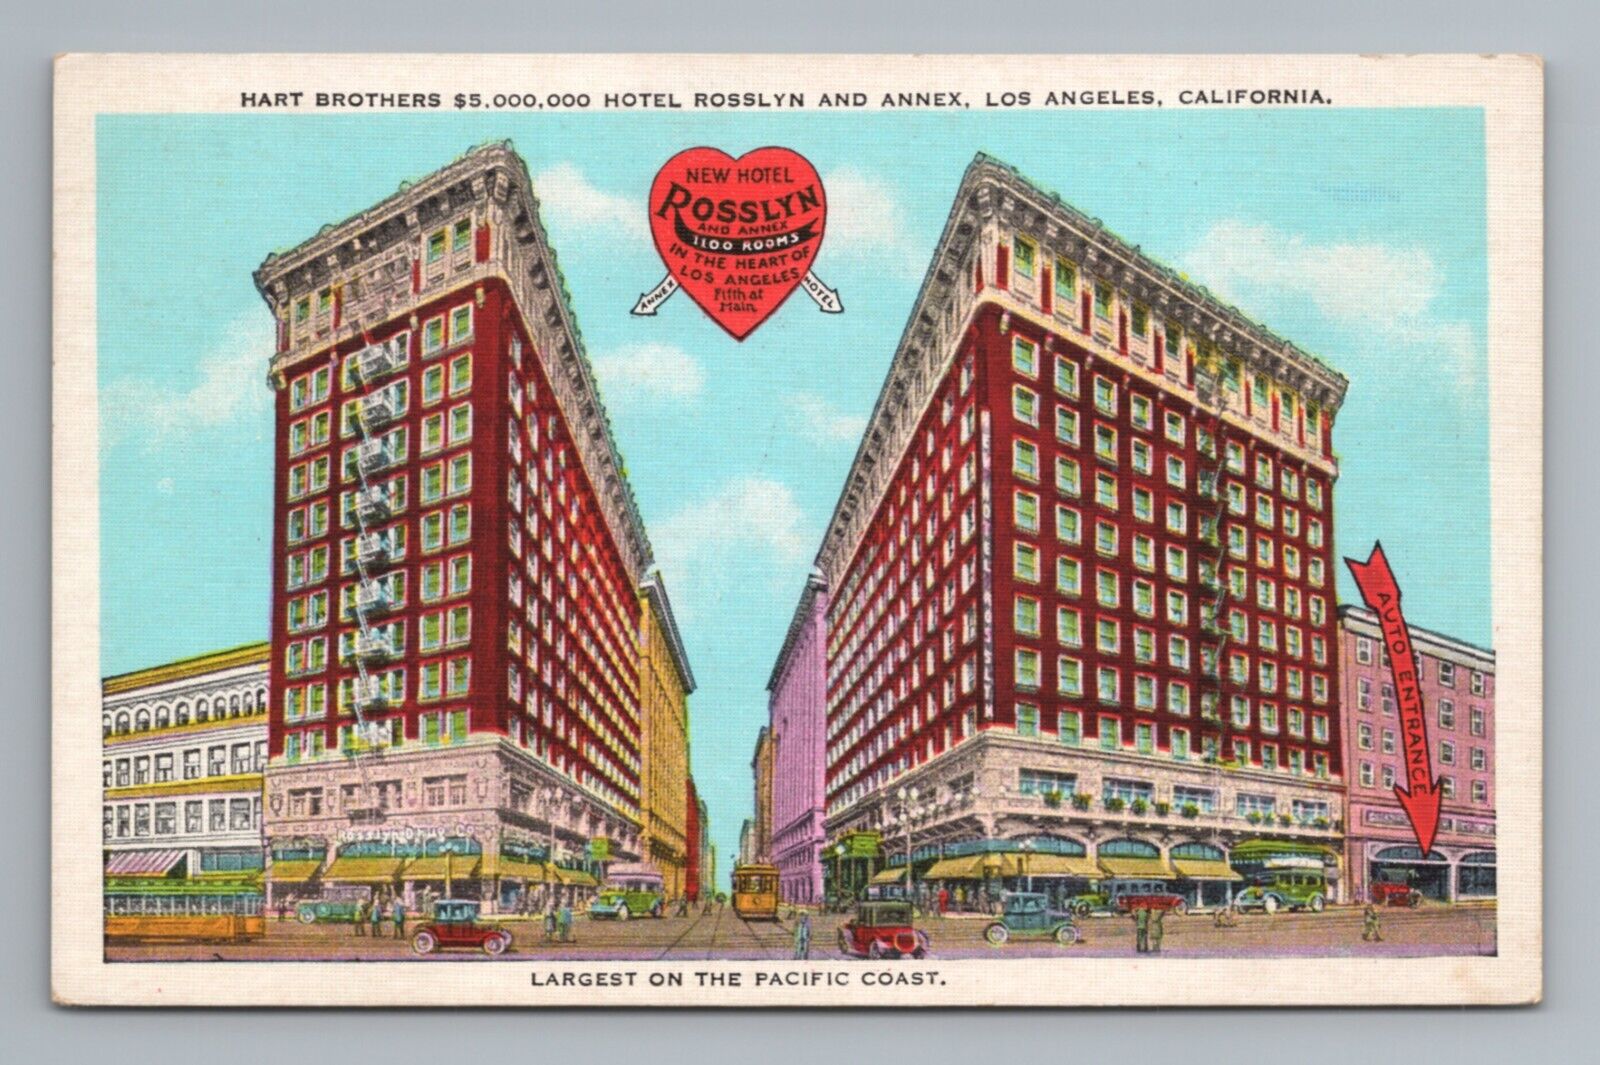 Hart Brothers Hotel Rosslyn and Annex Los Angeles California Postcard